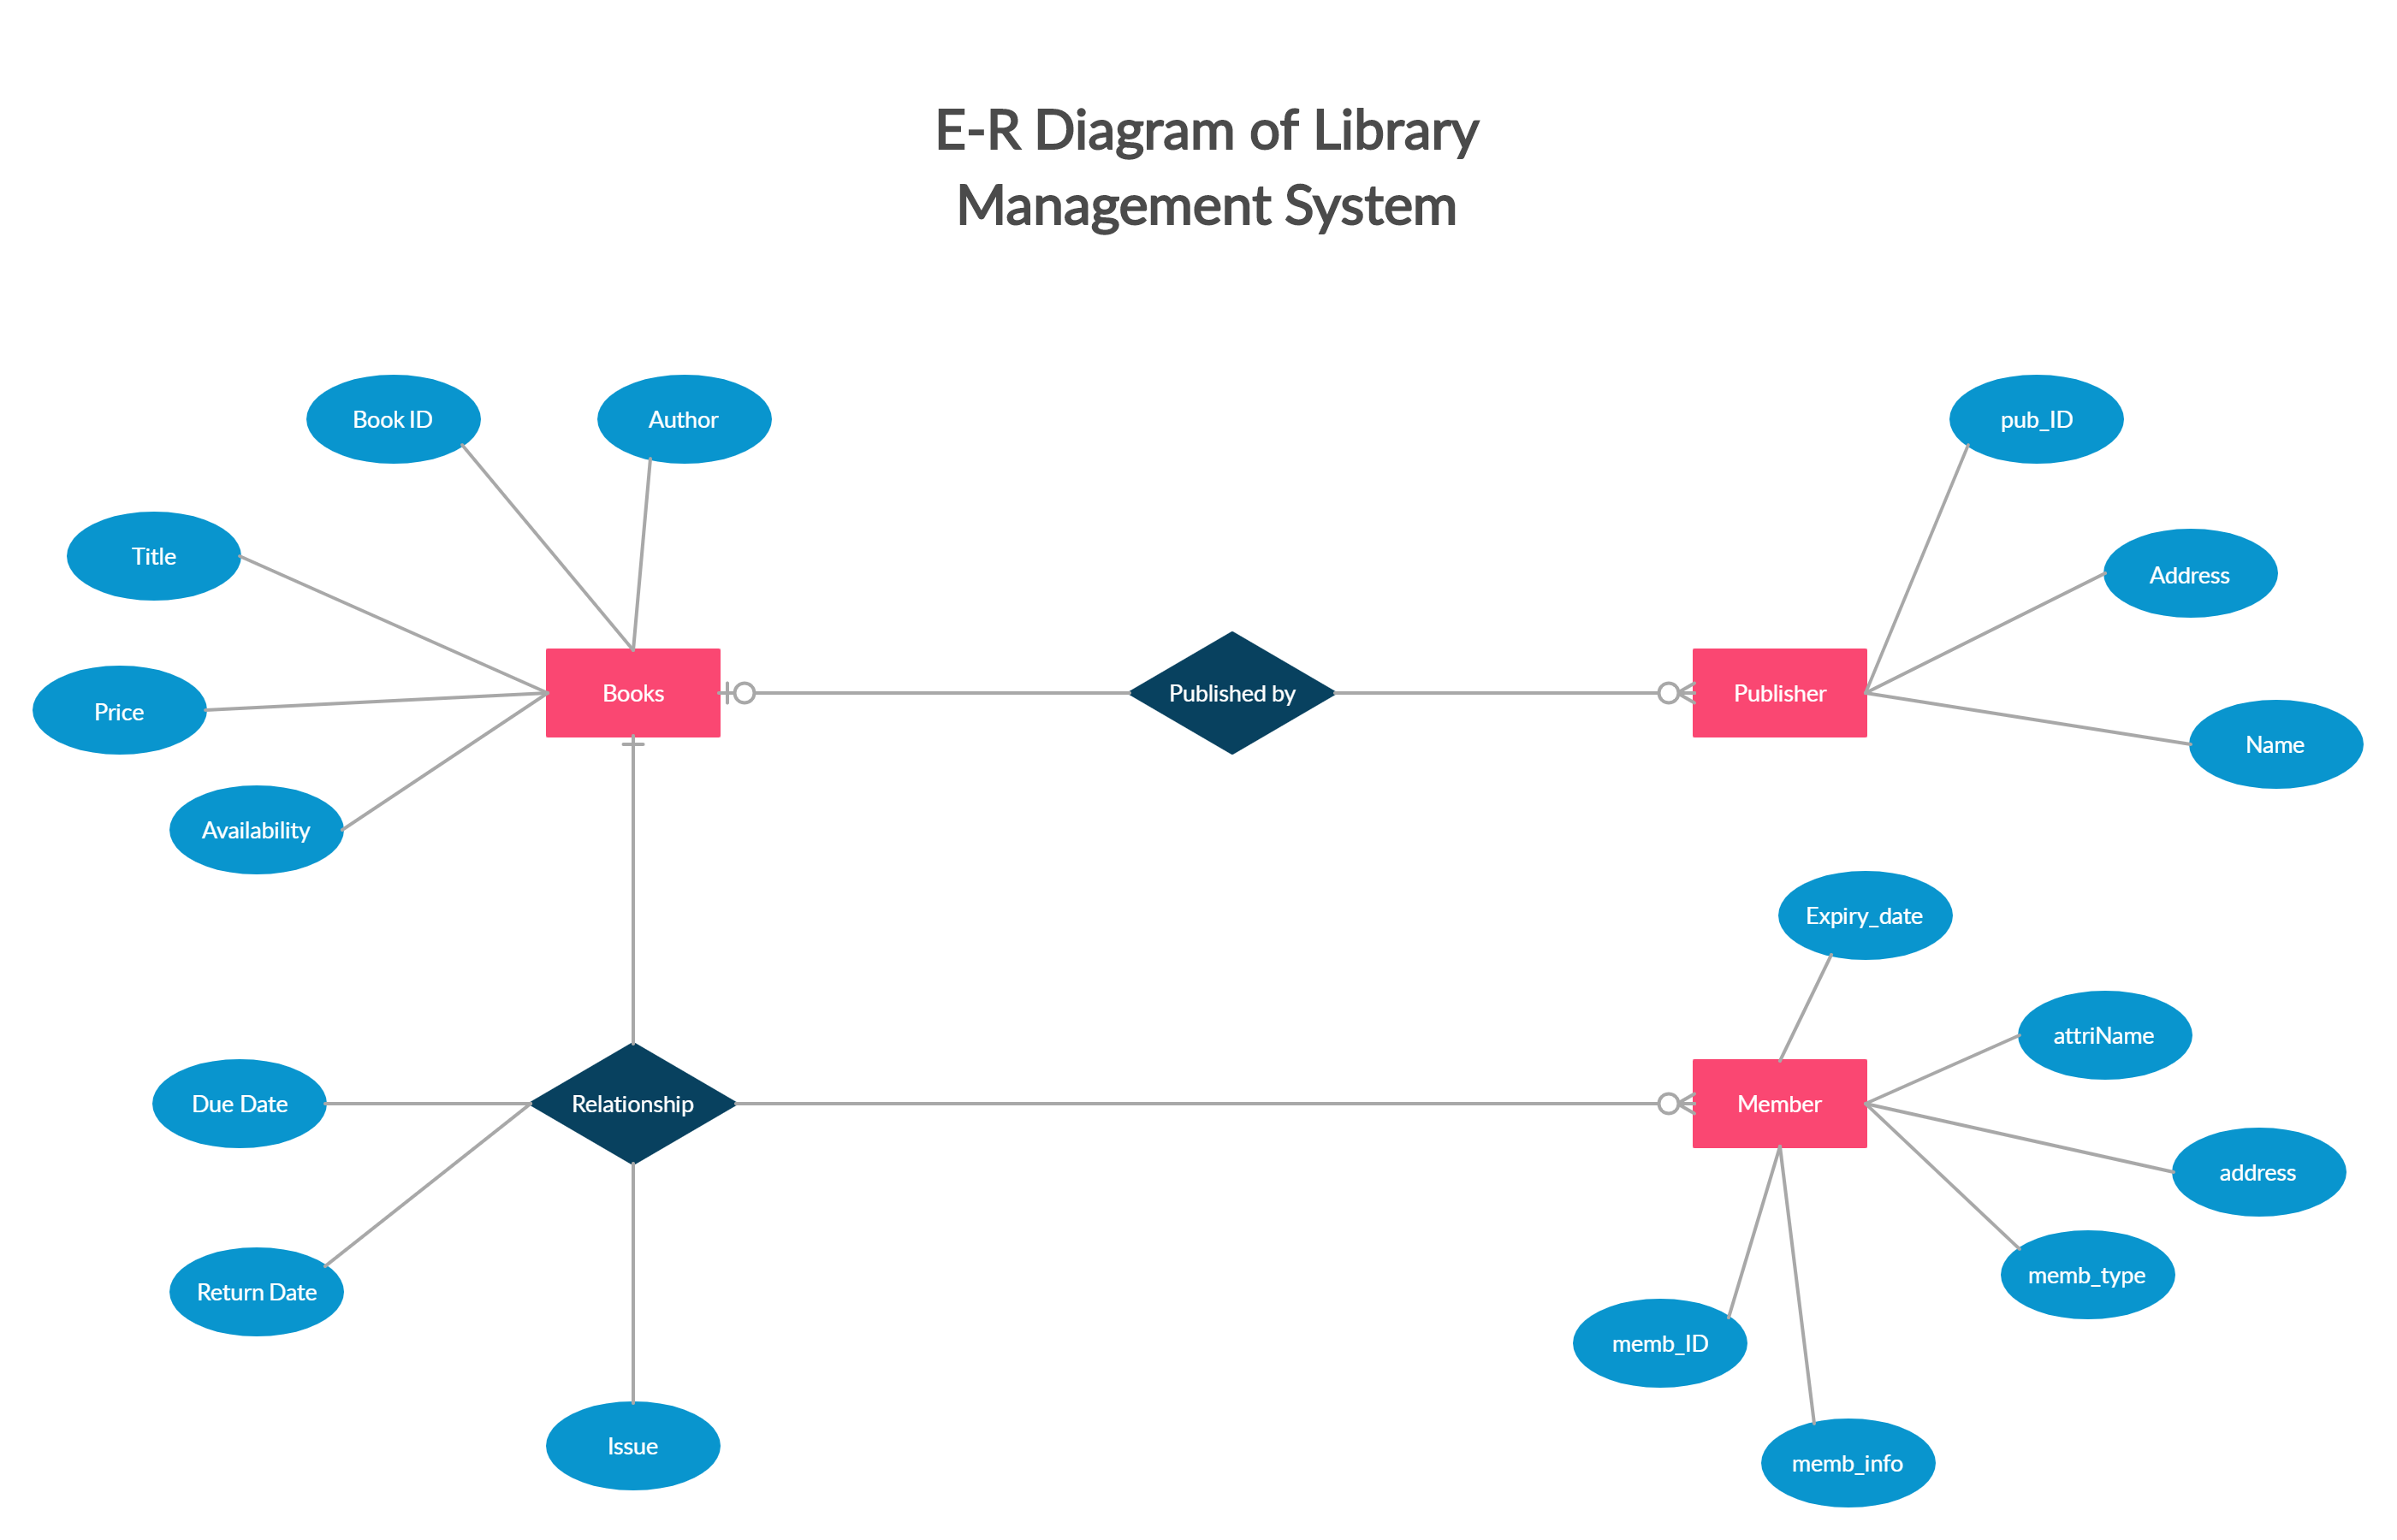 Er Diagram For Library Management System Of College 